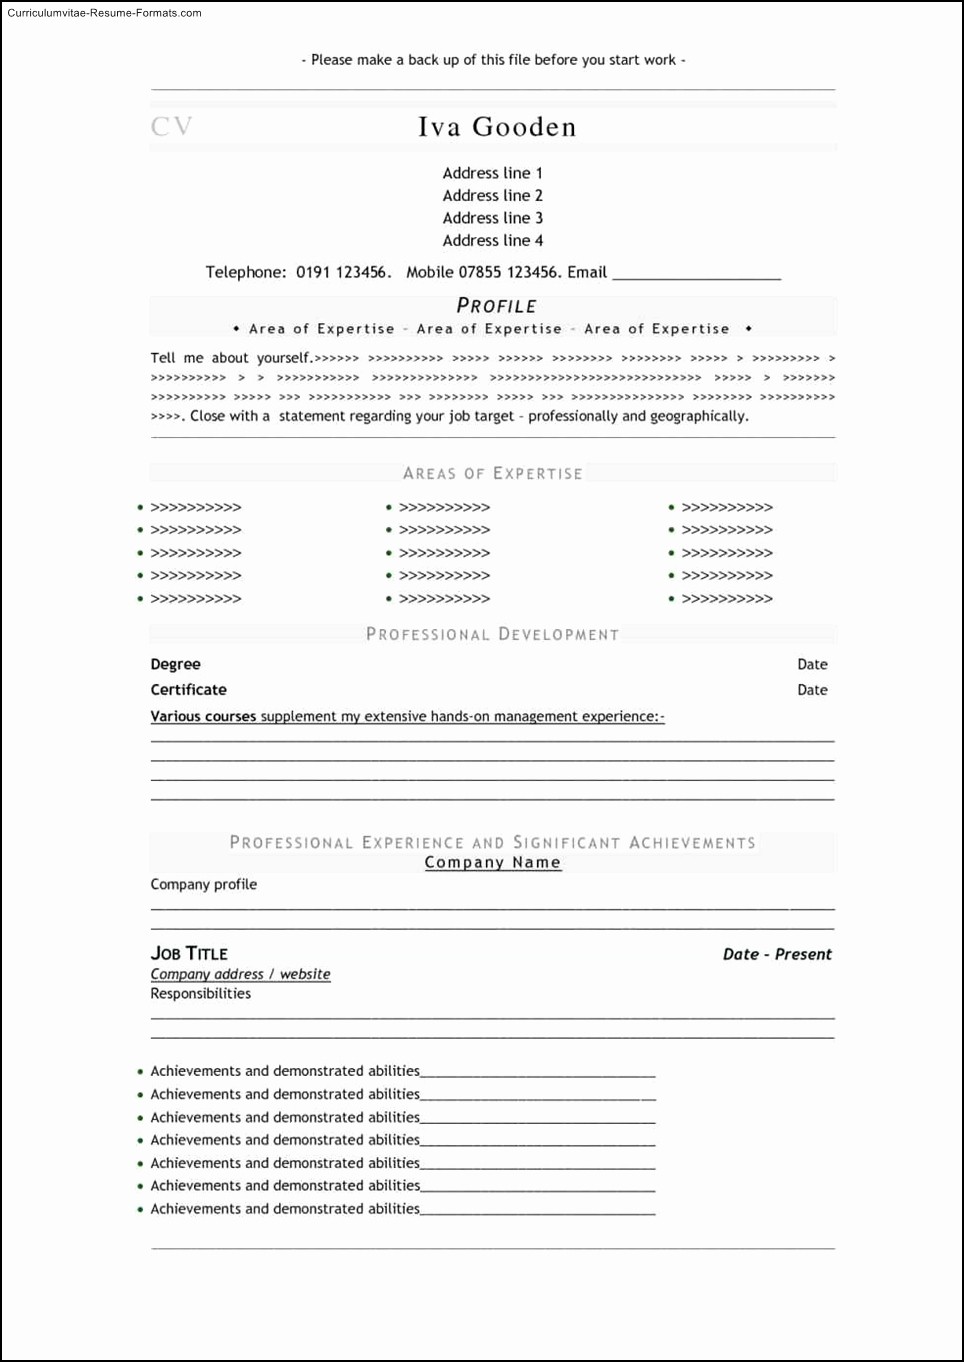 Professional Resume formats Free Download Fresh Download Free Professional Resume Templates Free Samples